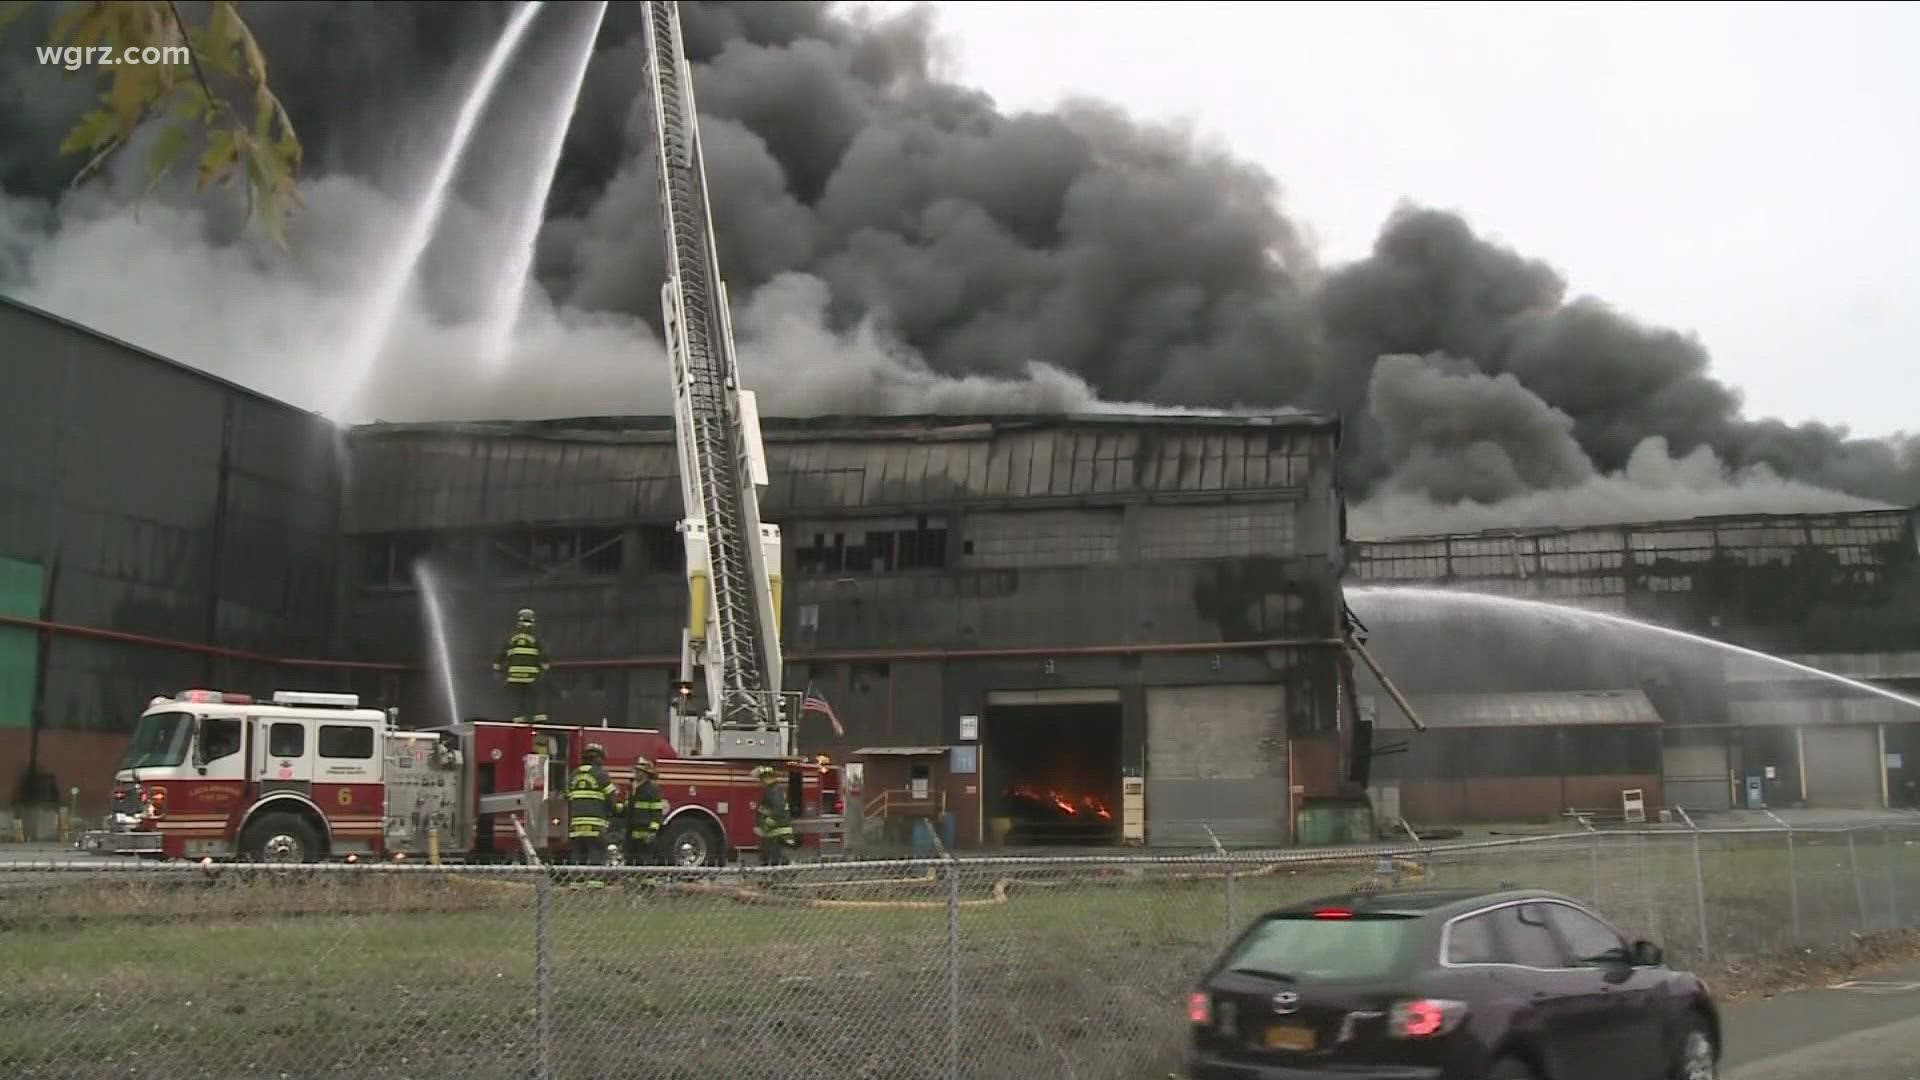 Firefighters from across the area spent 11 trying days getting the fire at the former Bethlehem Steel site under control.